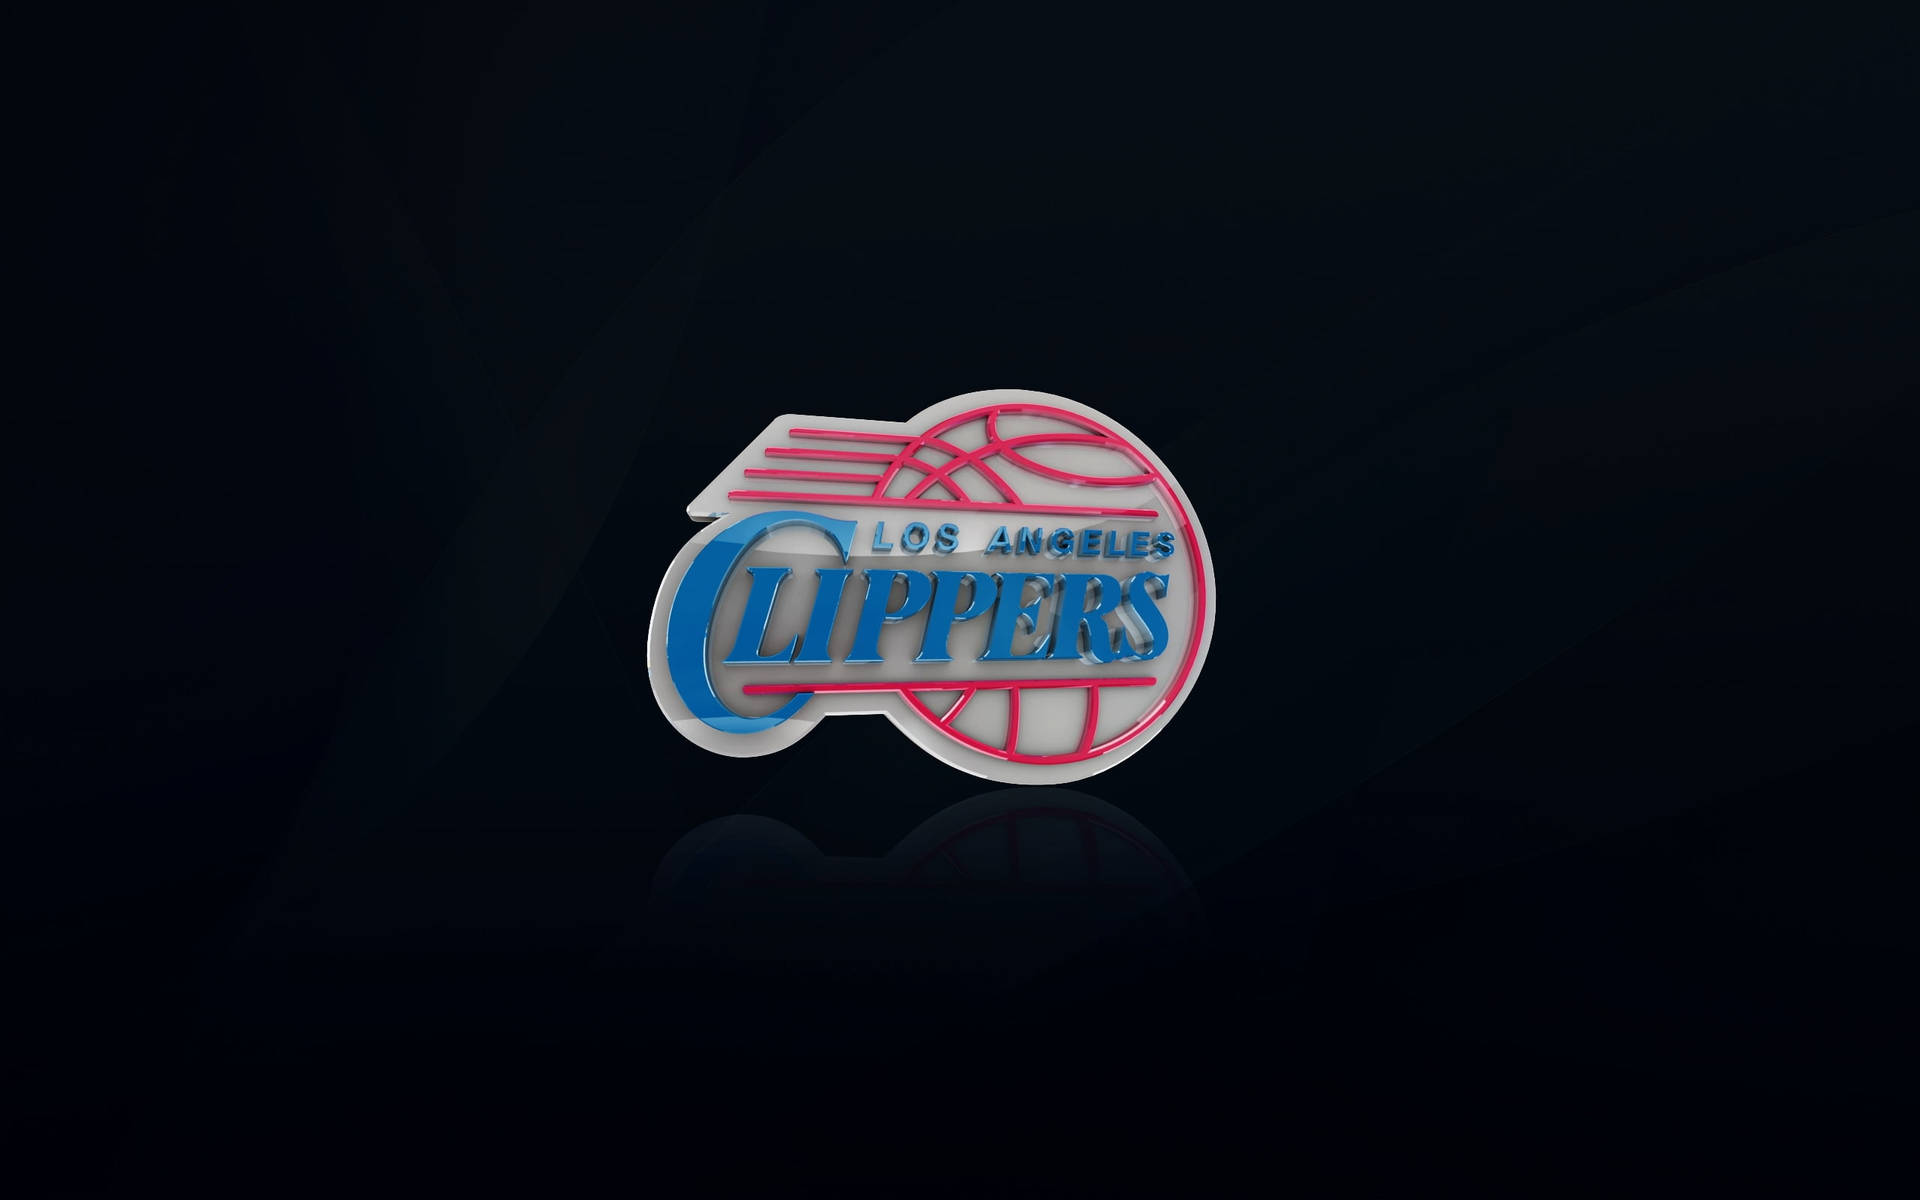 Los Angeles Clippers Glared Logo Wallpaper